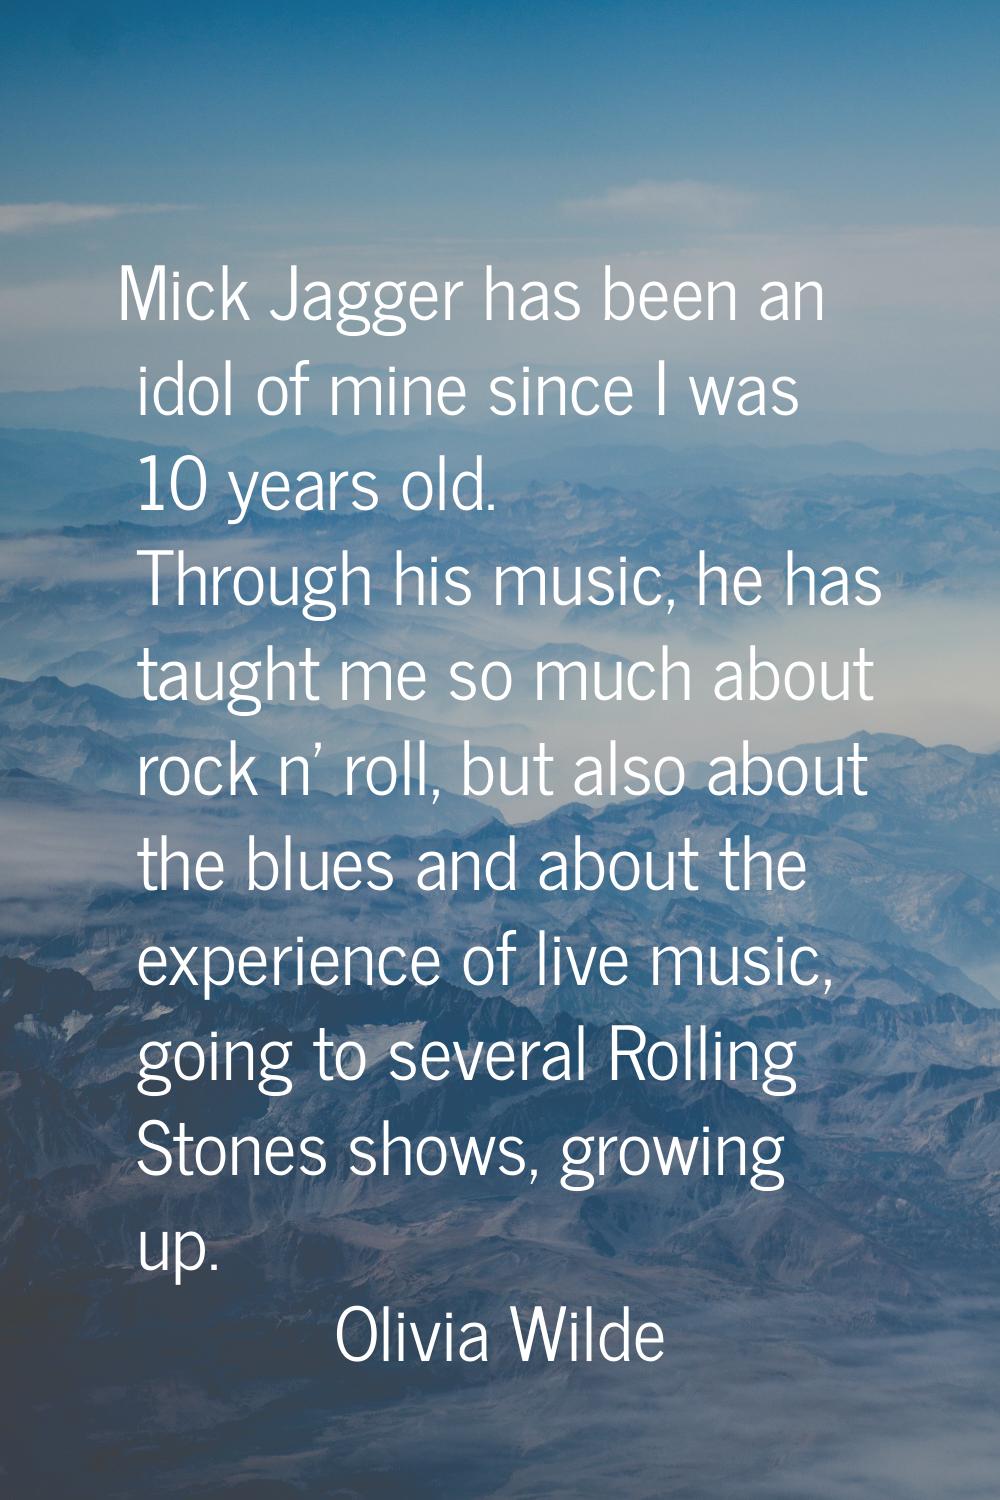 Mick Jagger has been an idol of mine since I was 10 years old. Through his music, he has taught me 